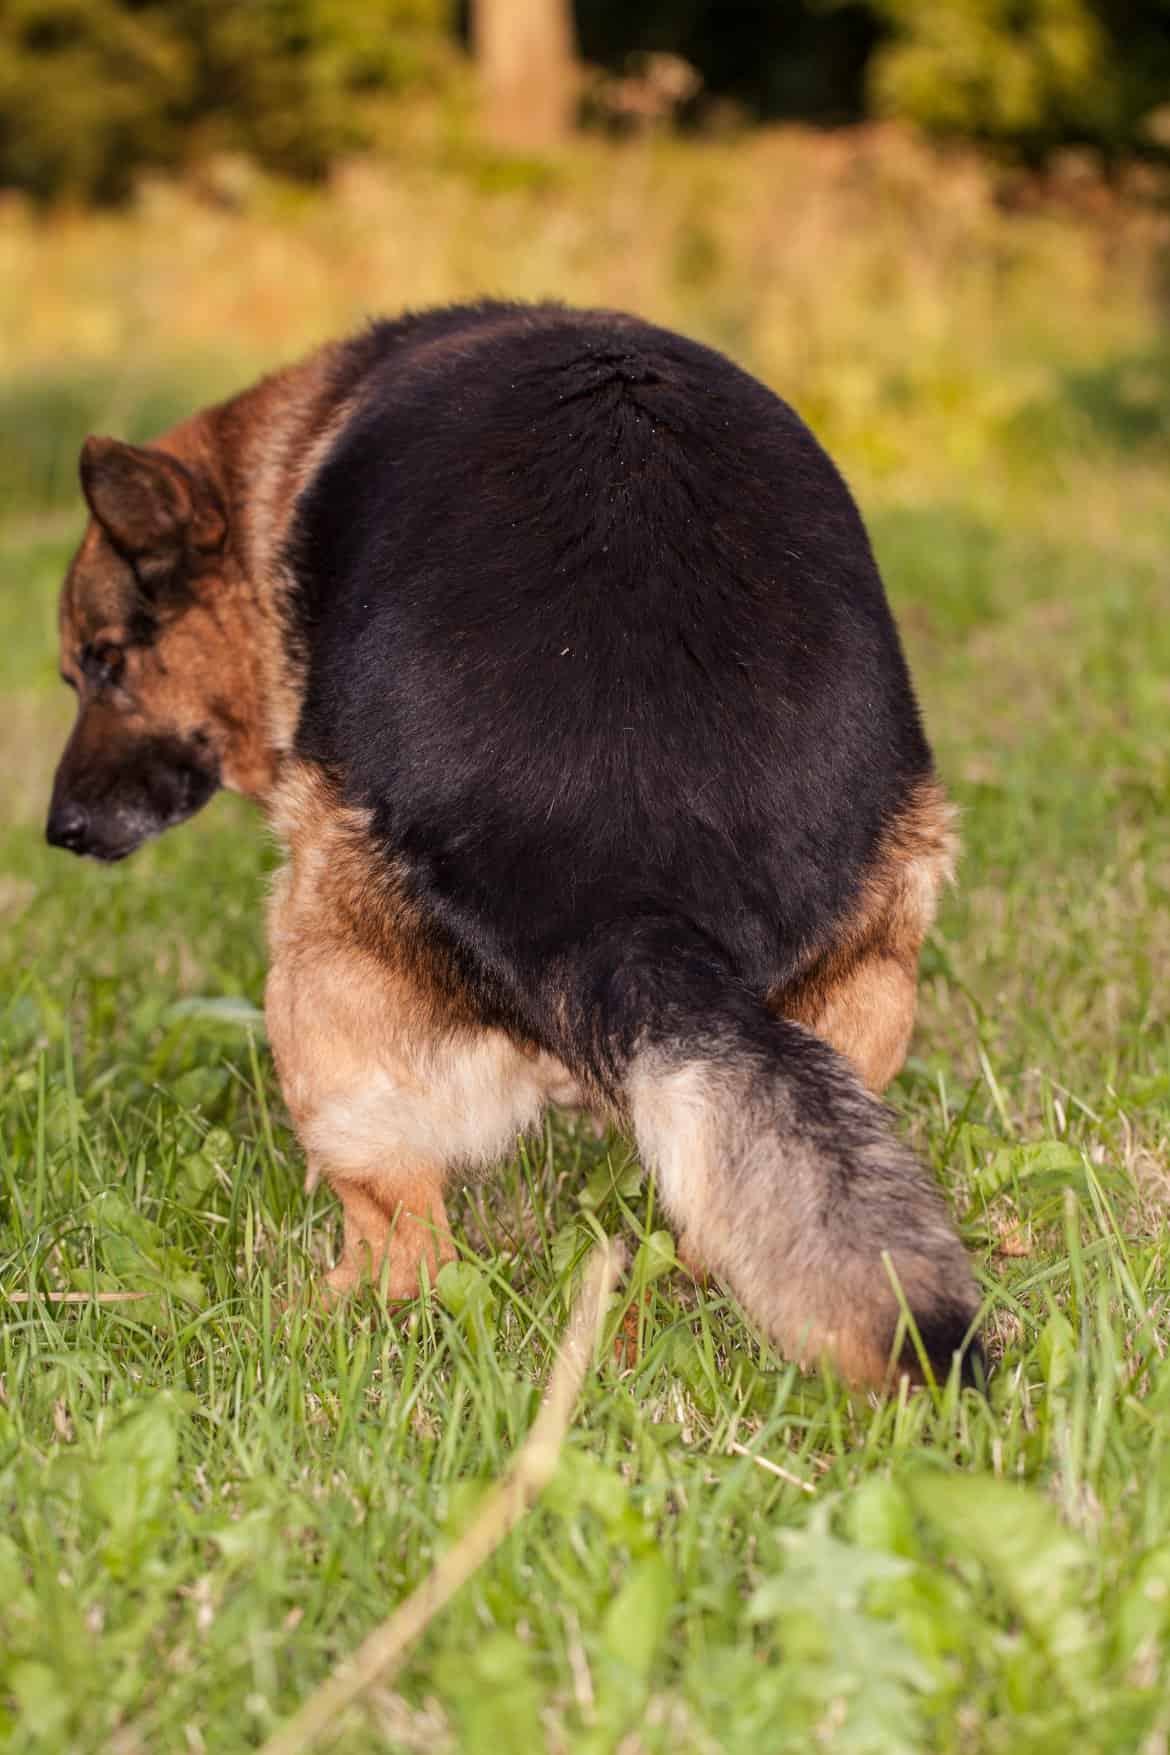 Why does my dog pee and poop at the same time?